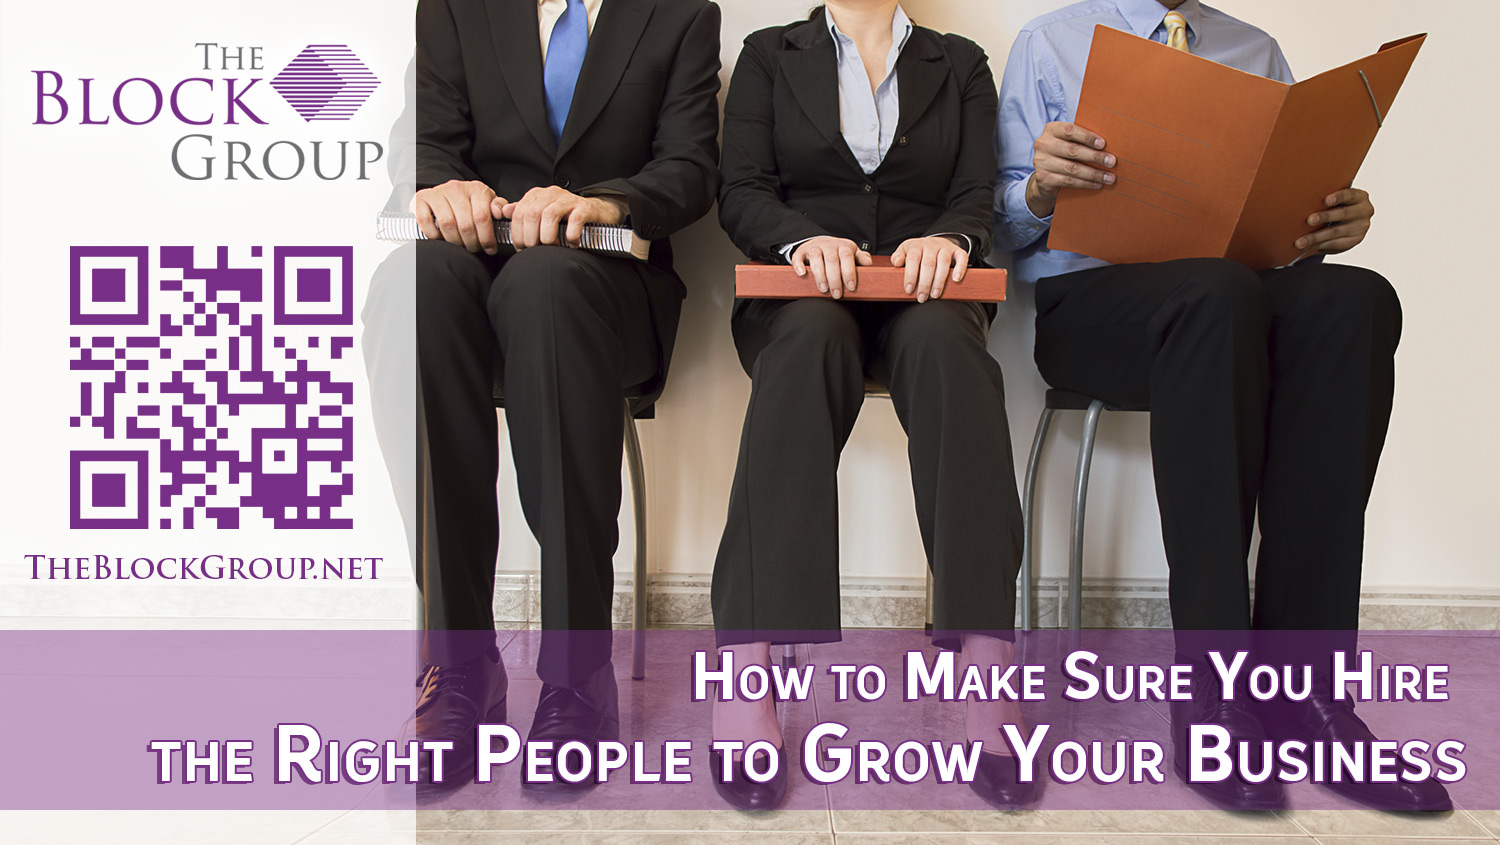 BIG-How-to-Make-Sure-You-Hire-Right-PeoplE